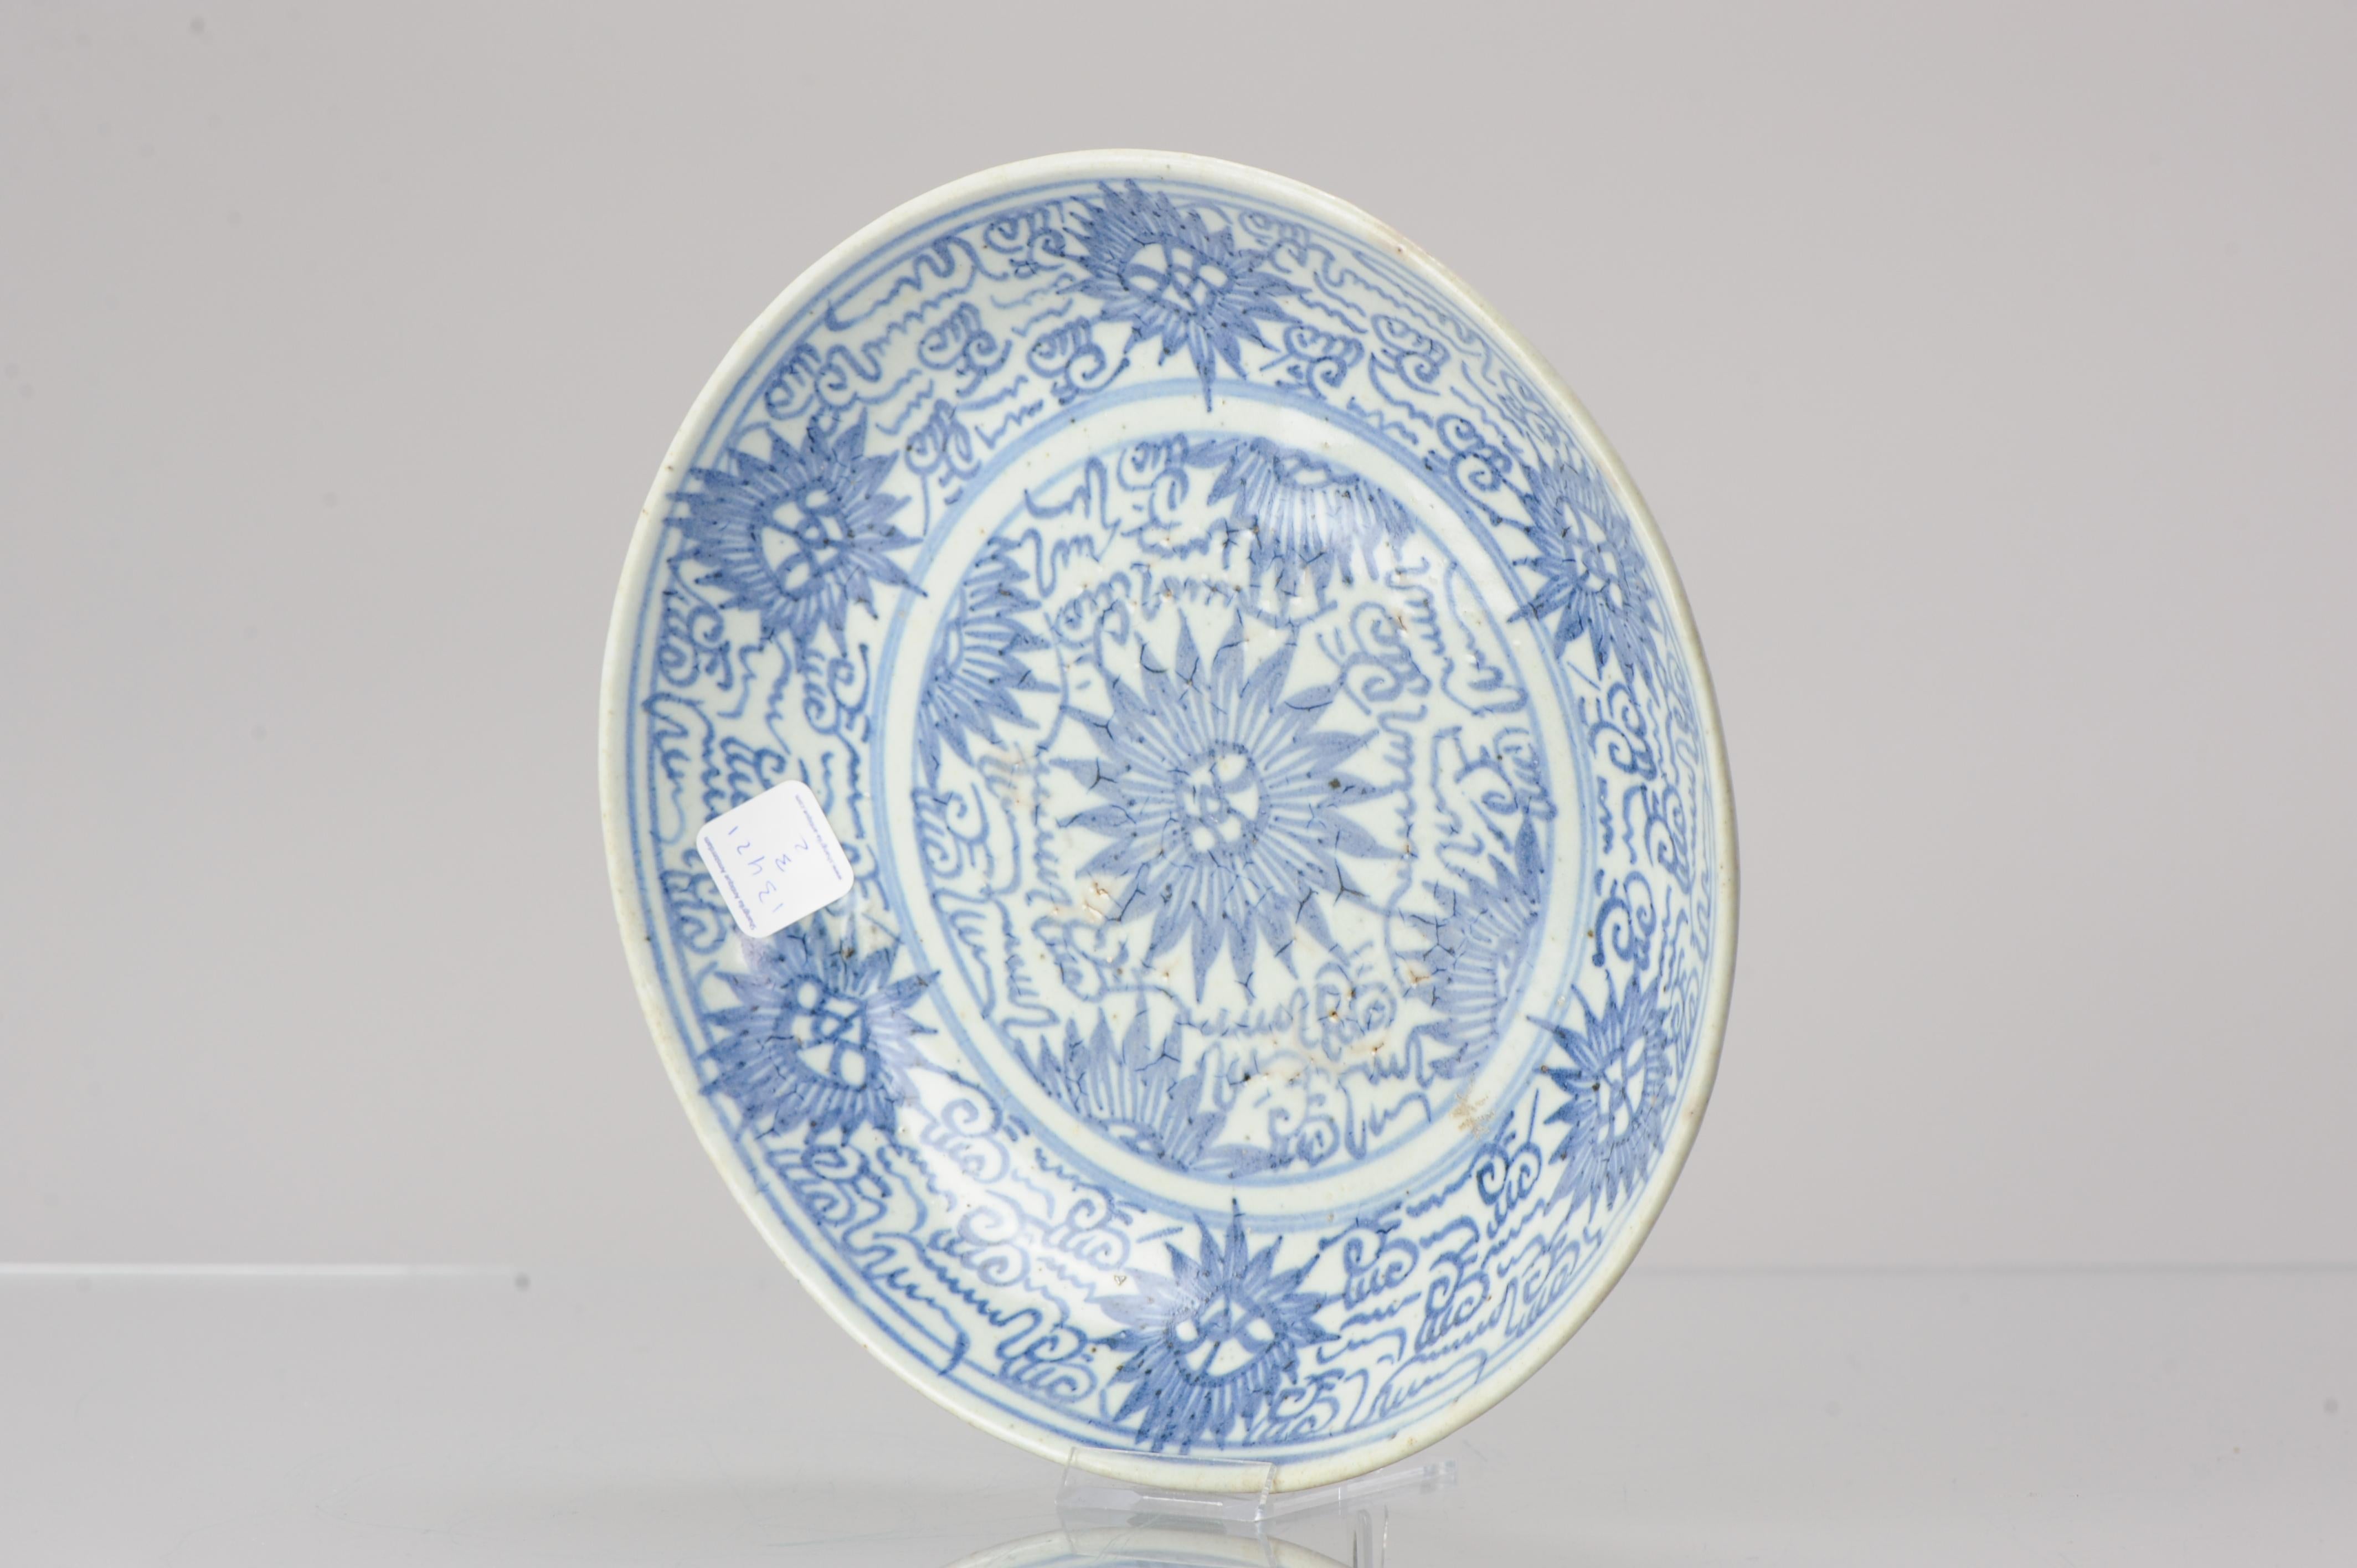 Lovely Chinese porcelain plate. Kitchen Qing.

A nice example with central medaillon with asters and islamic script. Owners mark close to the double rings at border.

Similar pieces pictured in;
Nonya Ware and Kitchen Ching: Ceremonial and Domestic